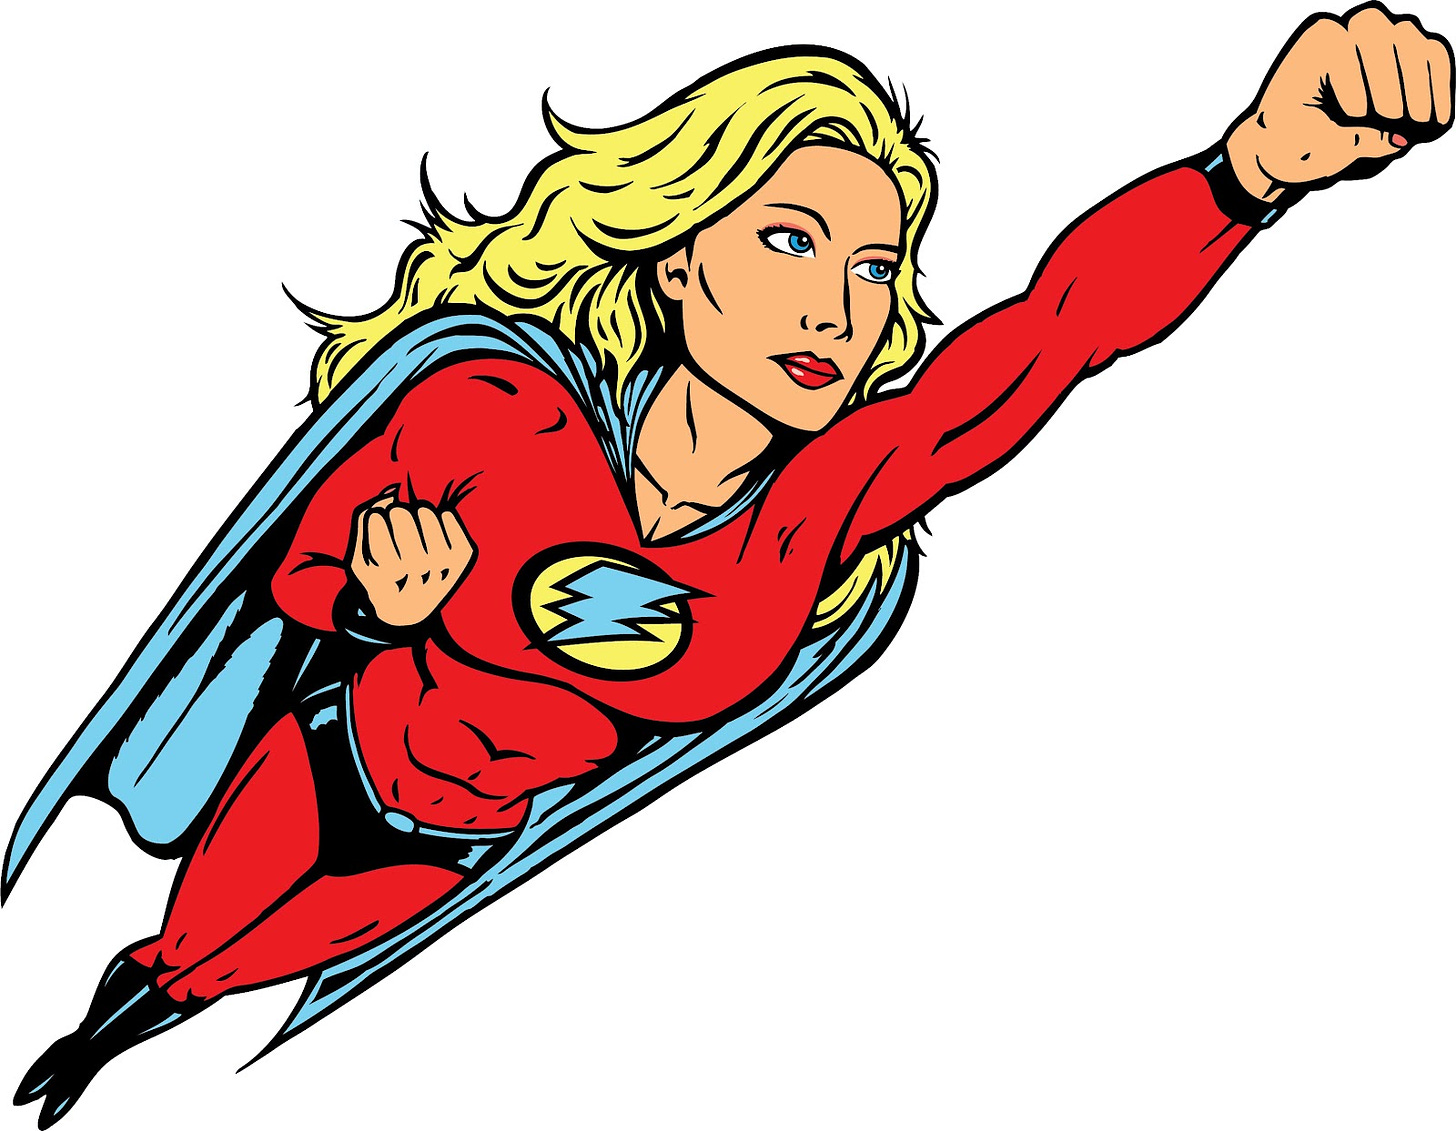 Superwoman: Are you always stressed? | The Busy Woman Project - Journal